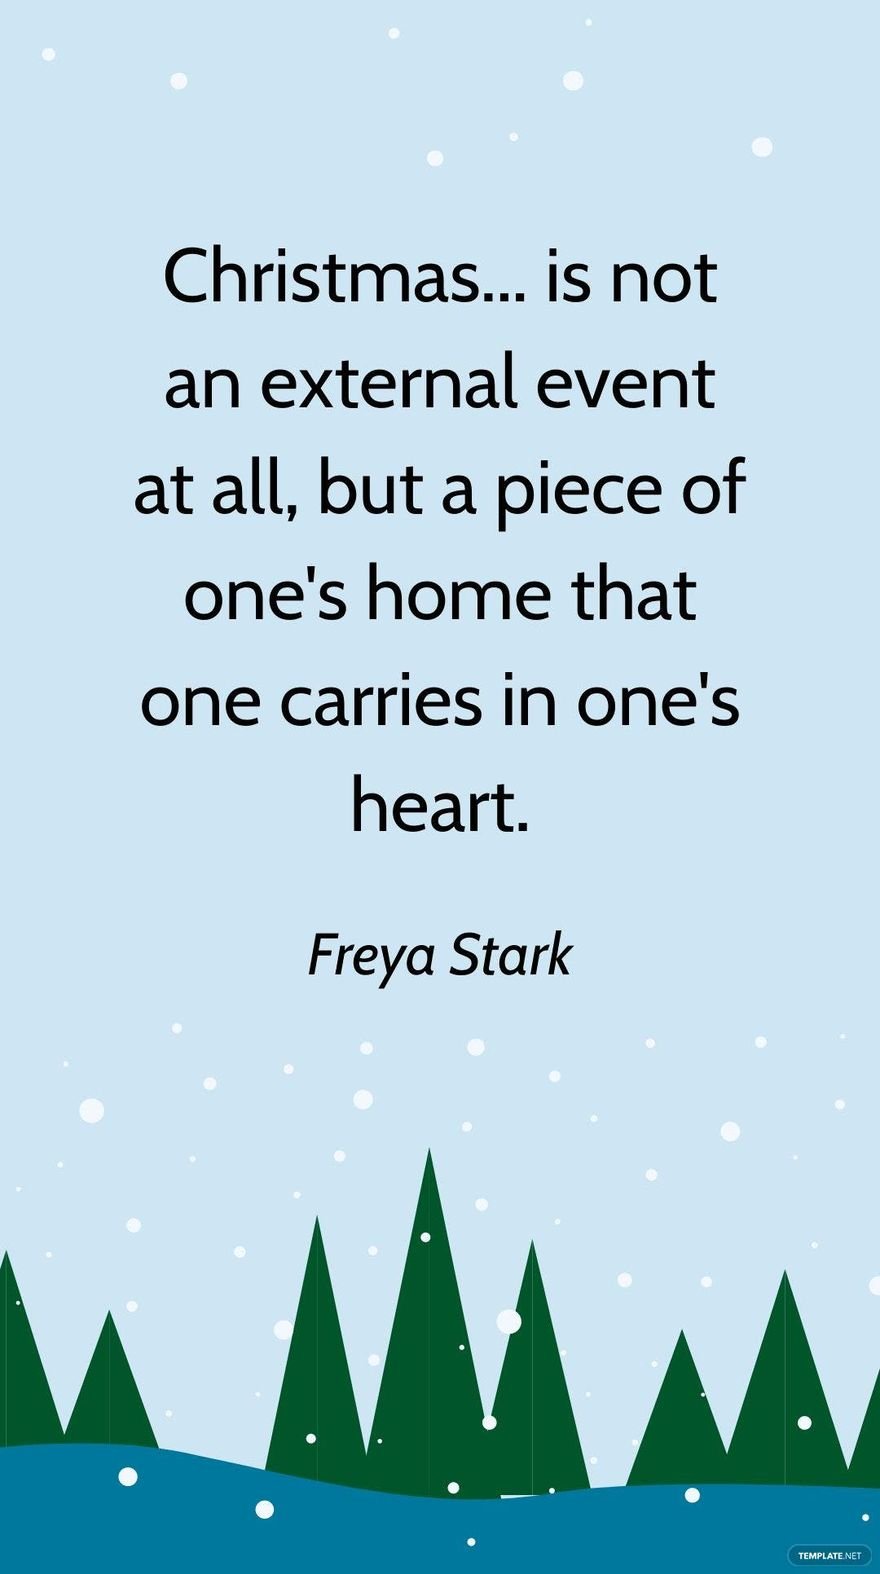 Freya Stark - Christmas... is not an external event at all, but a piece of one's home that one carries in one's heart.